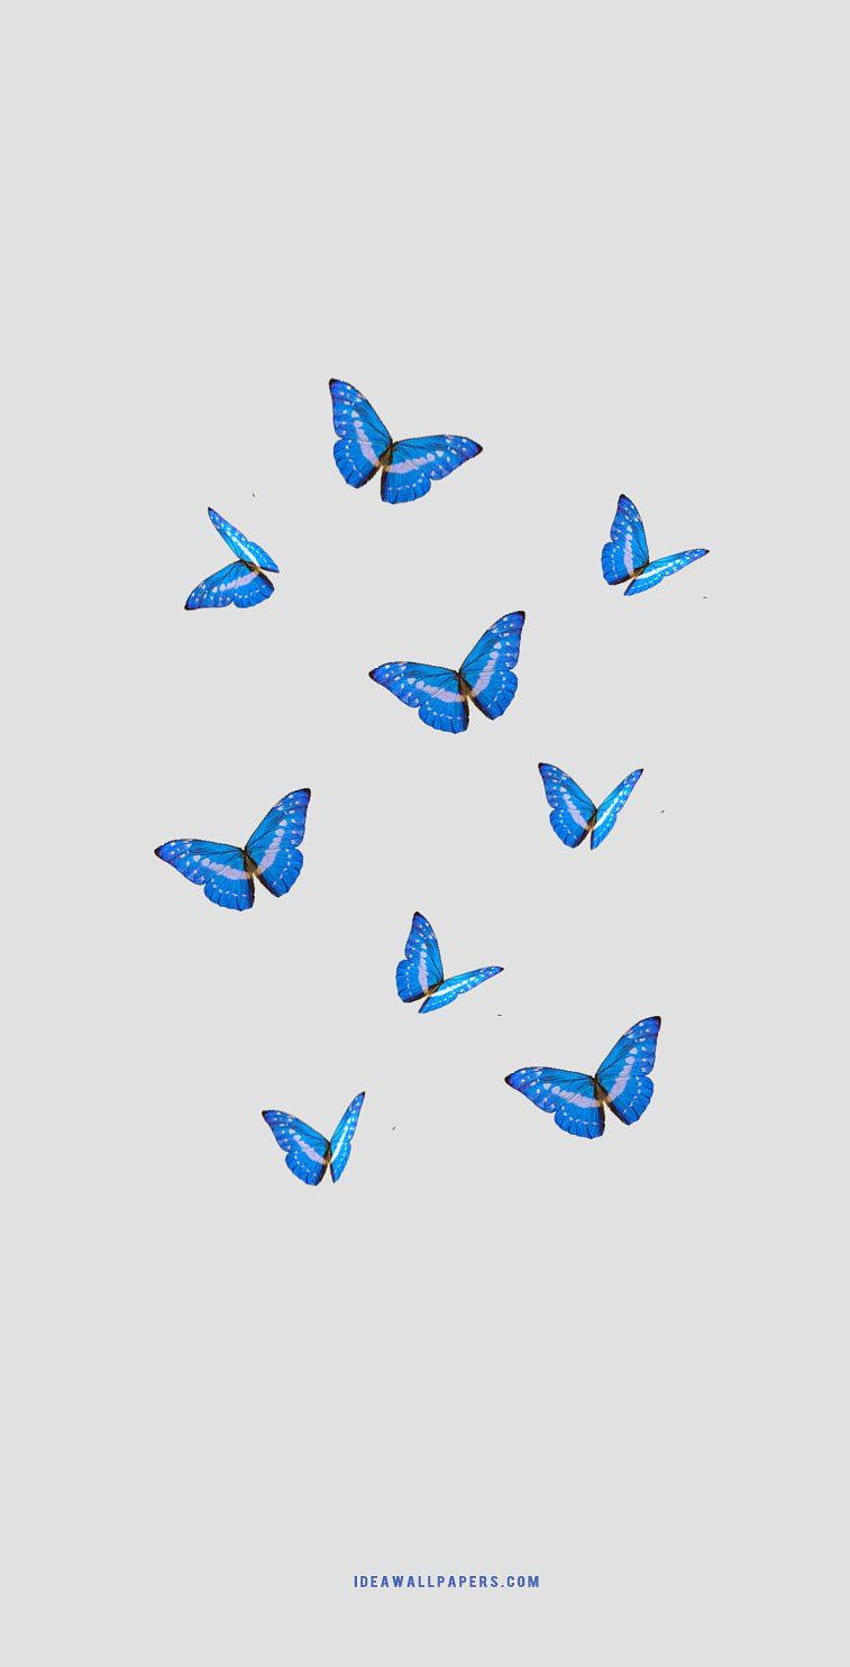 Butterfly Wallpaper For Your IPhone  Steph Social